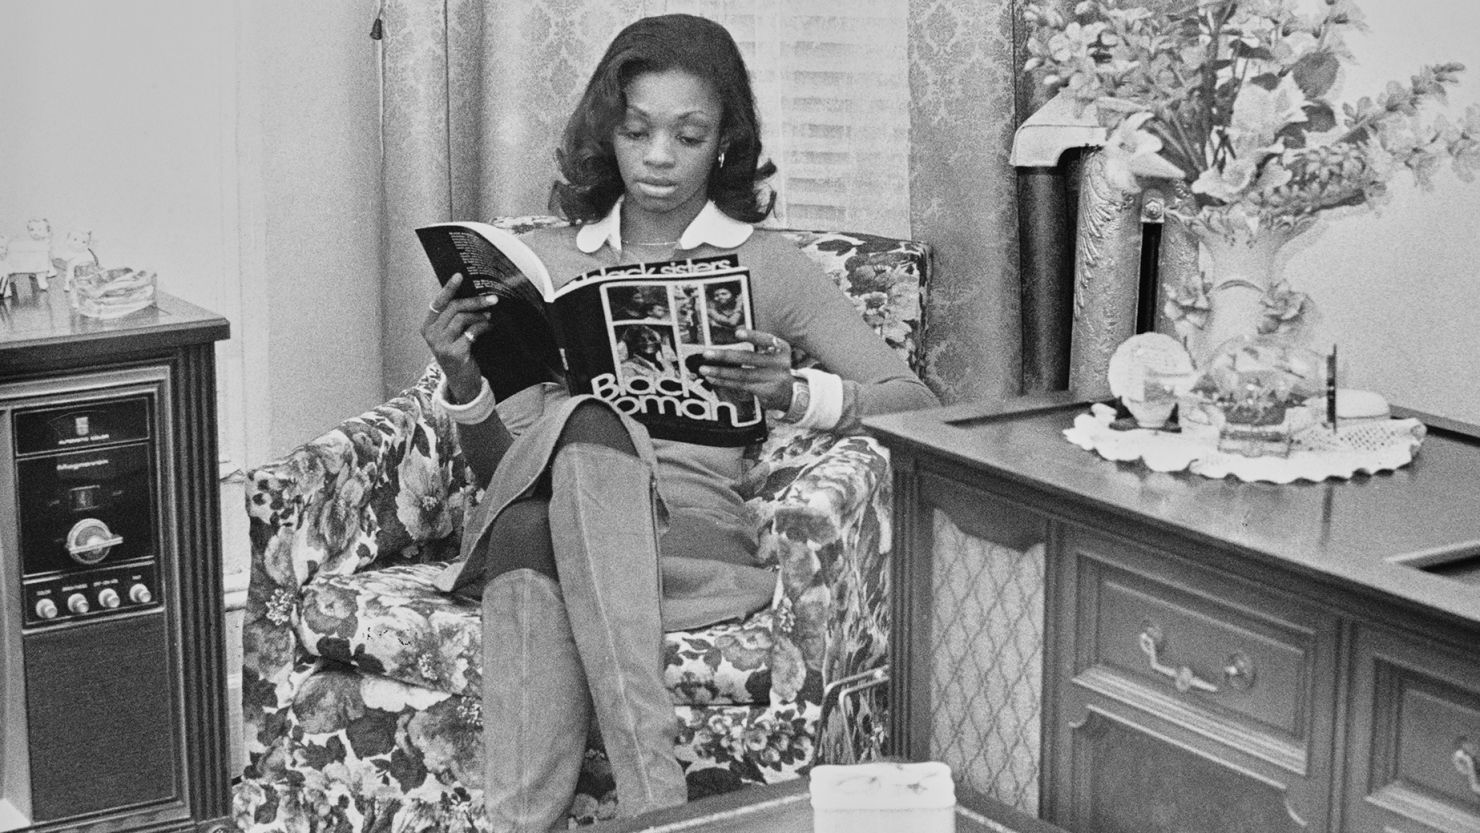 Alternative publications geared toward Black readers have long graced living room coffee tables in African American homes. A woman reads Black Woman magazine, circa 1970.